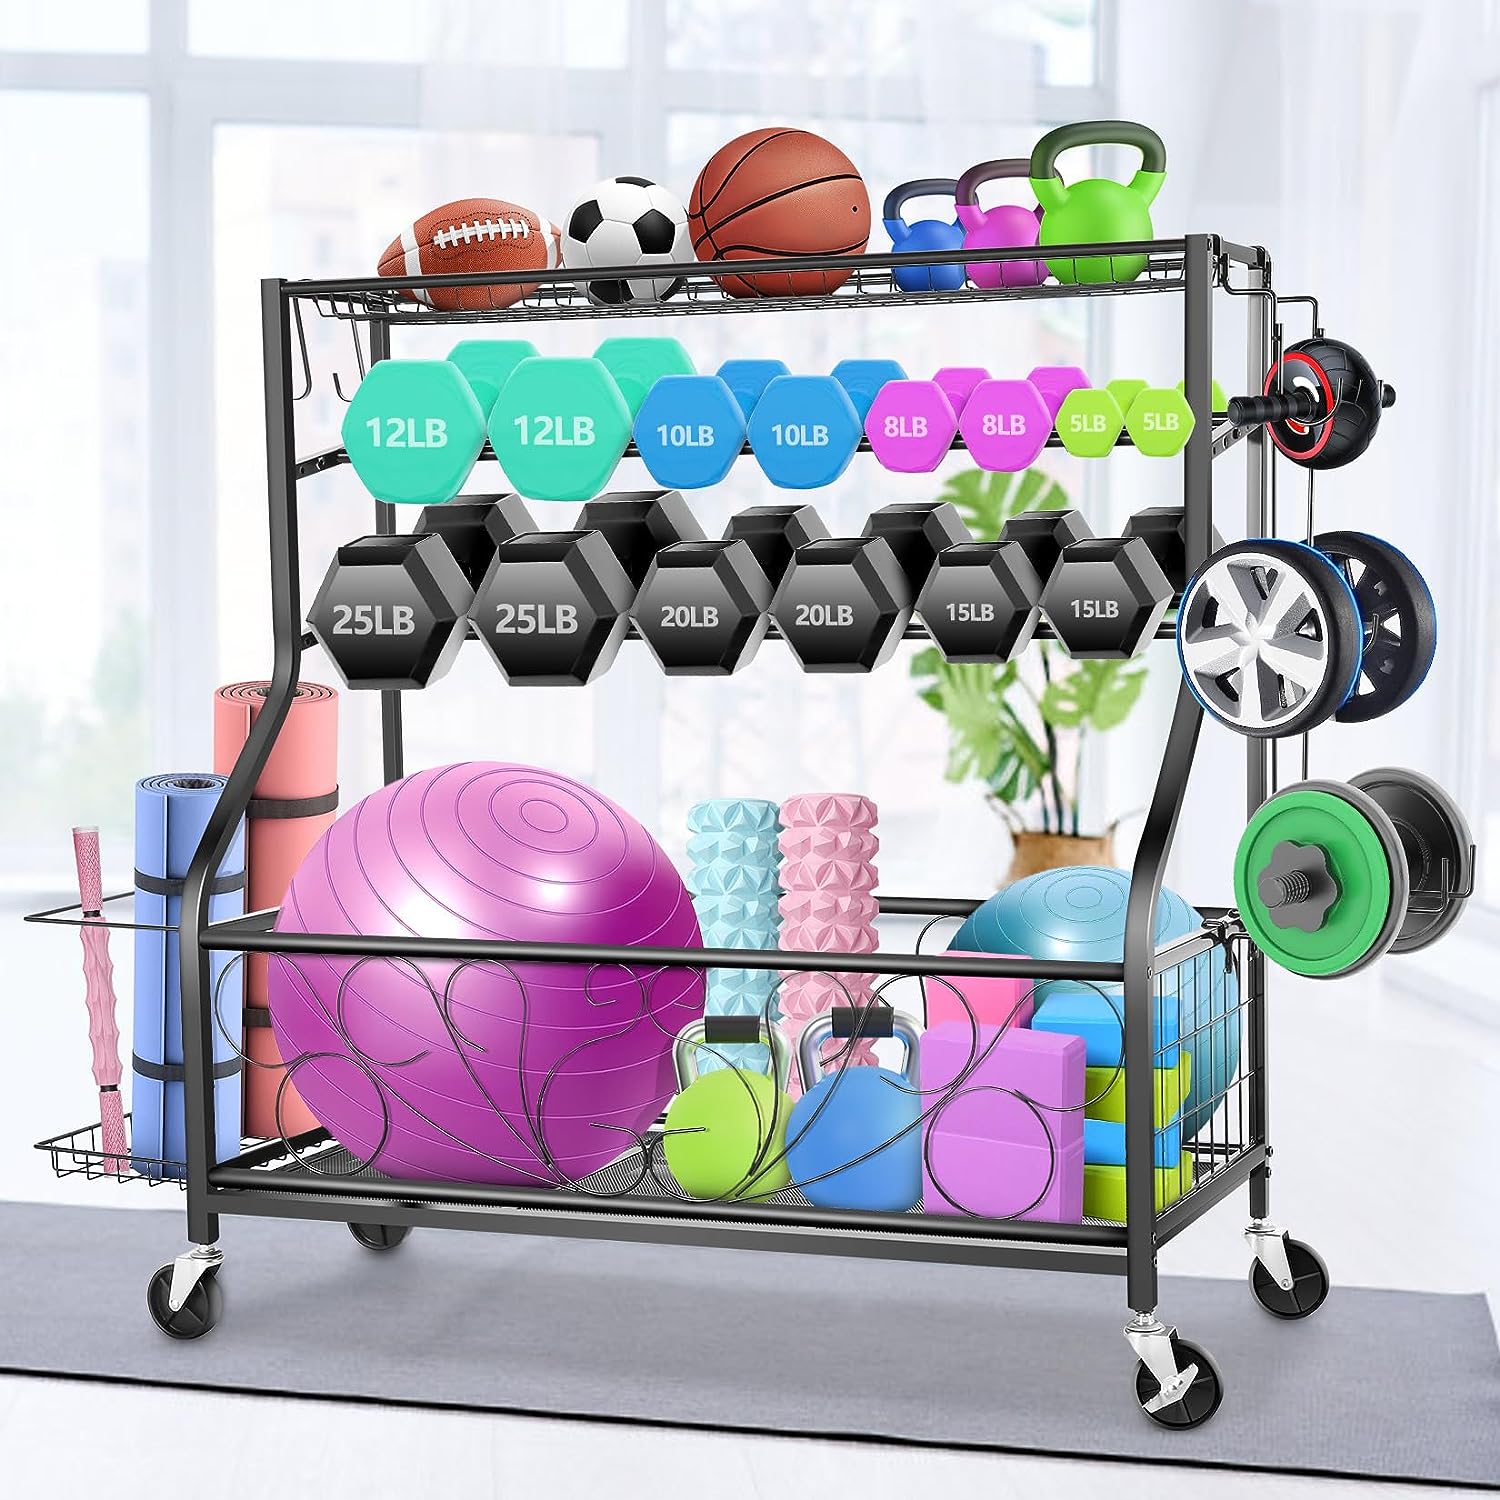 Upgrade Dumbbell Rack, Home Gym Storage Rack for Dumbbells Kettlebells Foam Roller Yoga Mat and Balls, Weight Rack All in One Workout Equipment Storage Organizer With Hooks and Wheels - Easy to Assemble